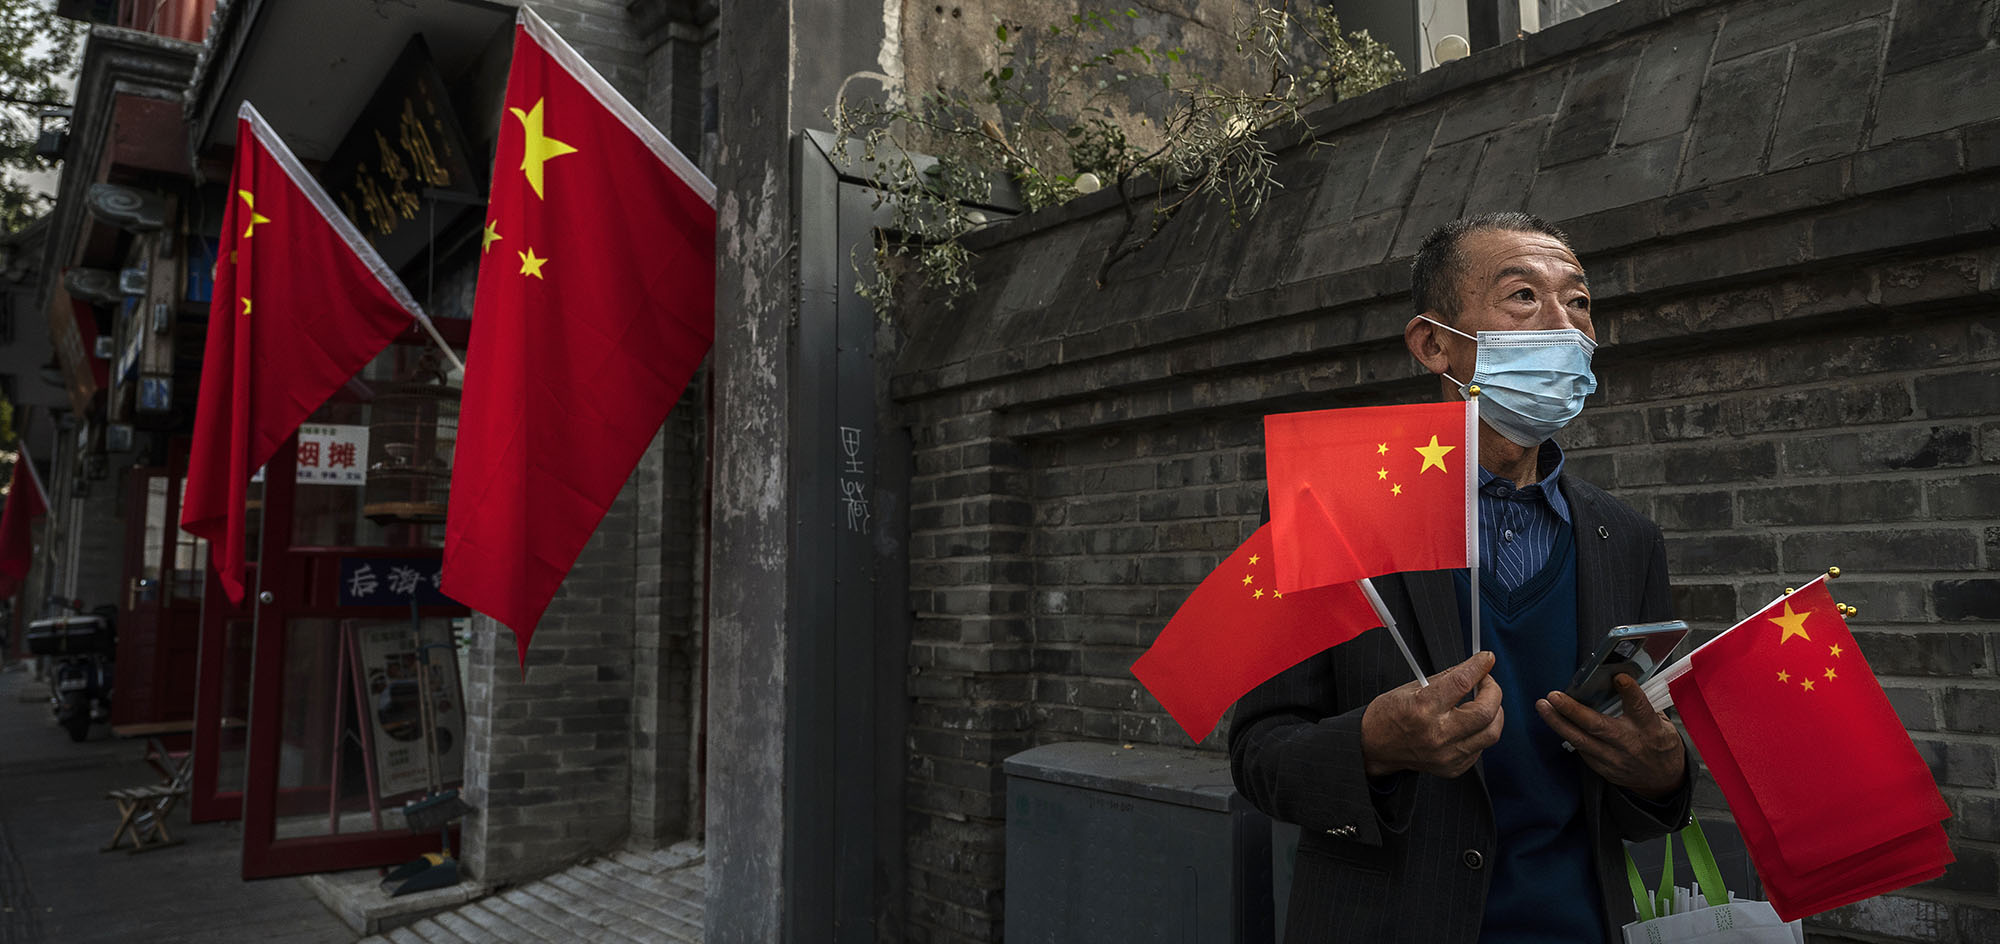 New report warns about coercion of religion by Chinese Communist Party – Baptist News Global